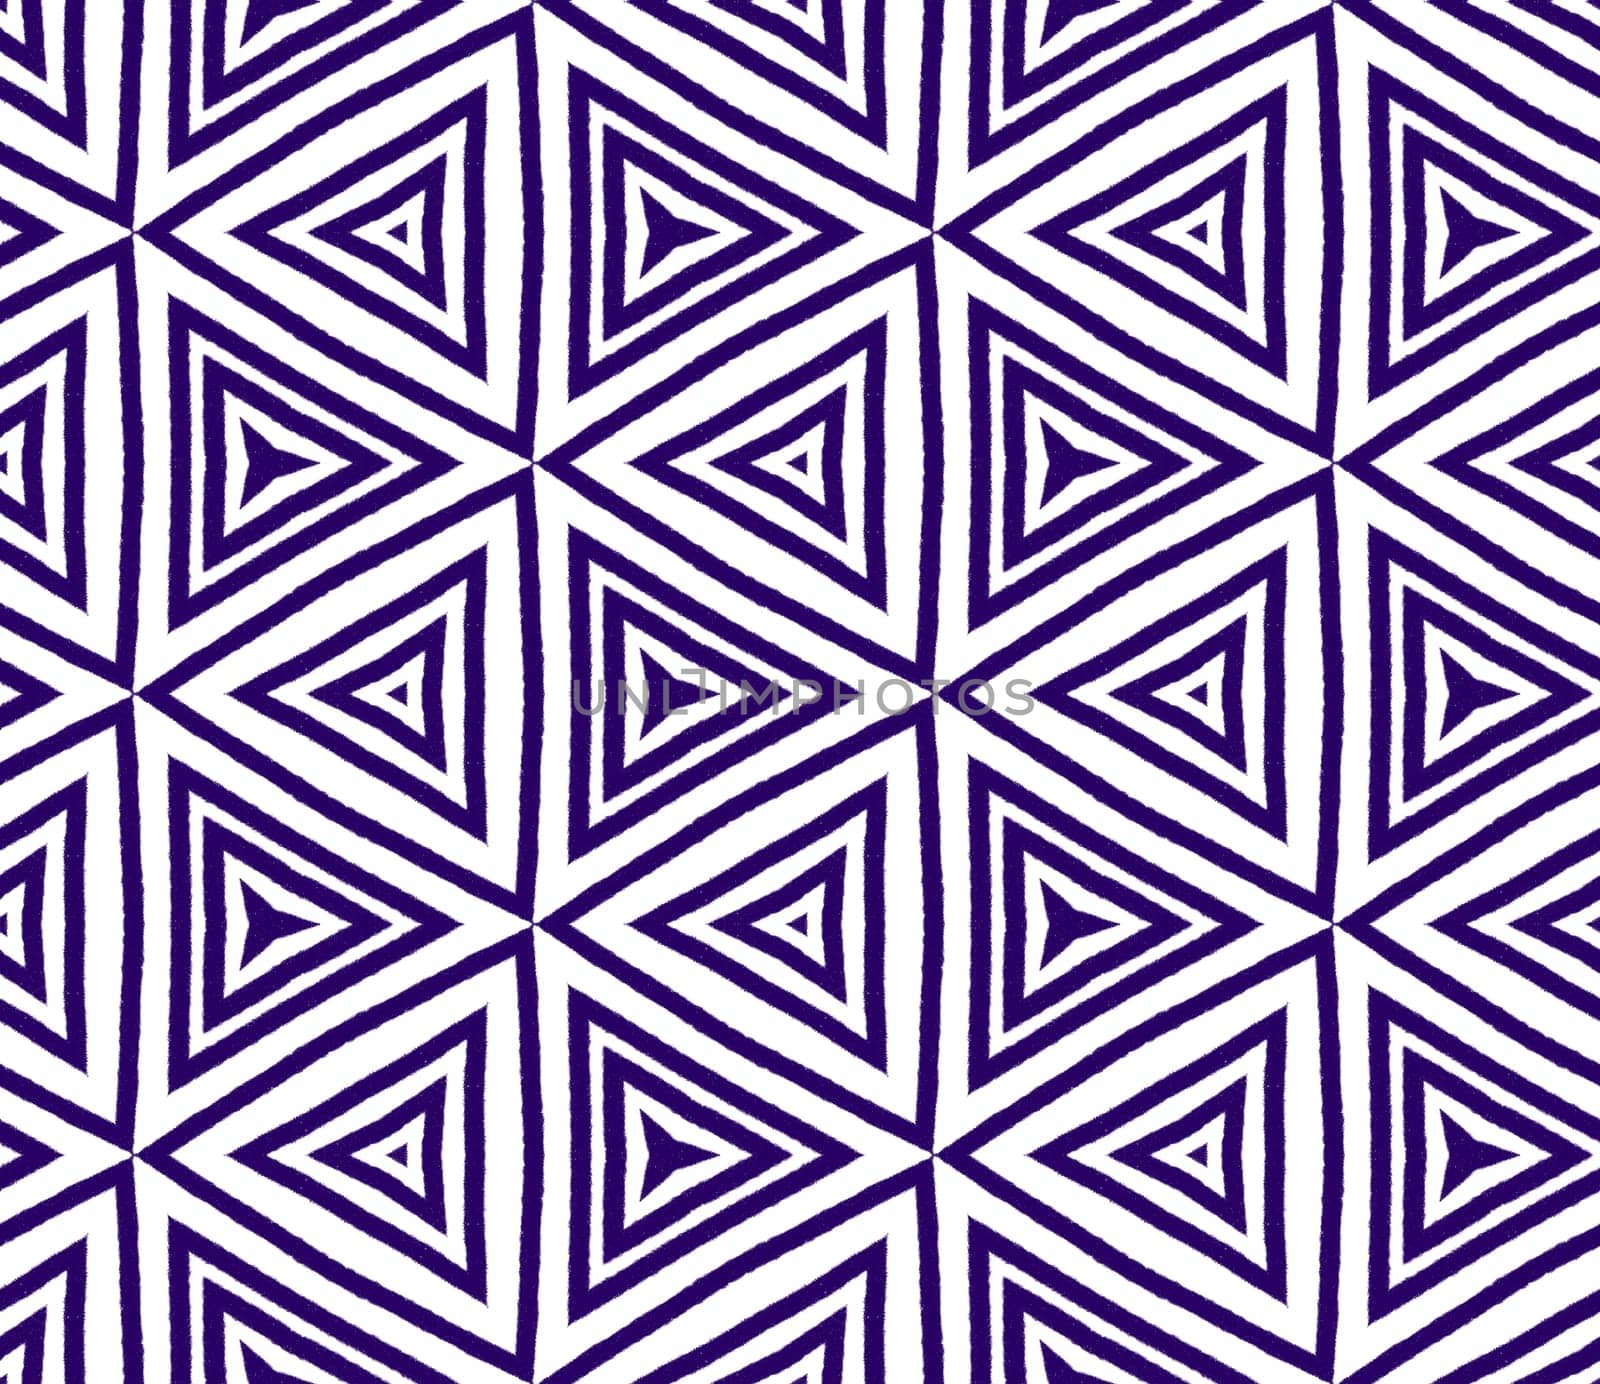 Ethnic hand painted pattern. Purple symmetrical kaleidoscope background. Textile ready creative print, swimwear fabric, wallpaper, wrapping. Summer dress ethnic hand painted tile.